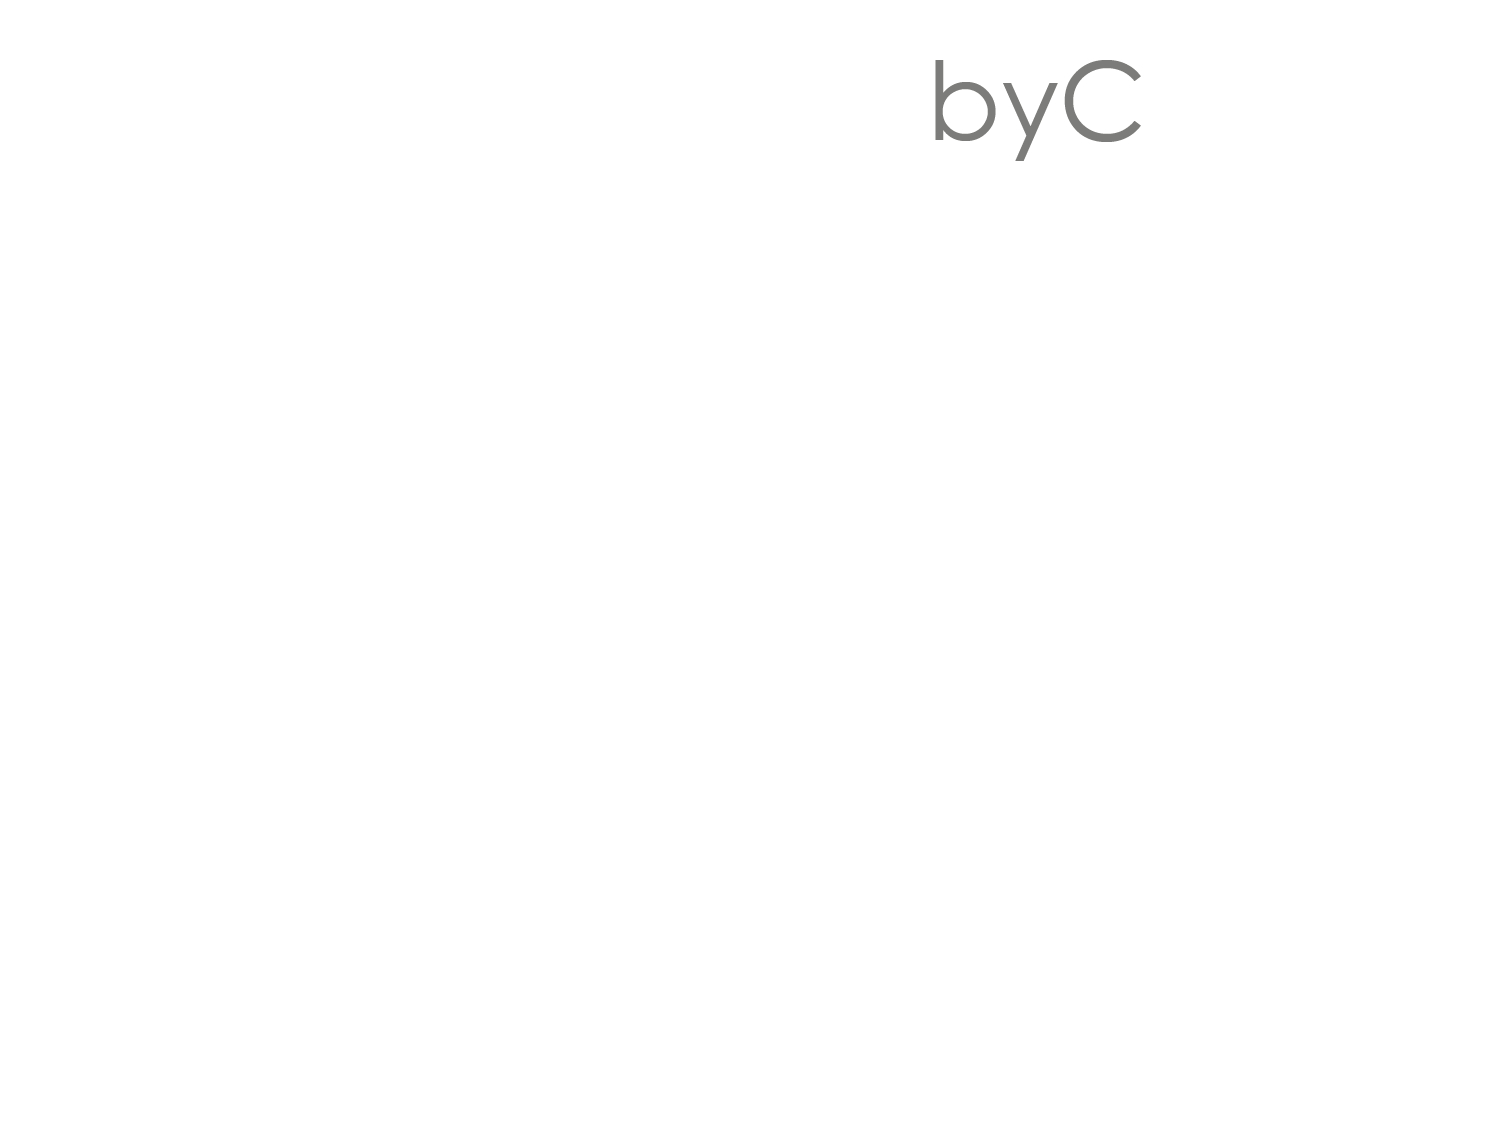 Self care by C